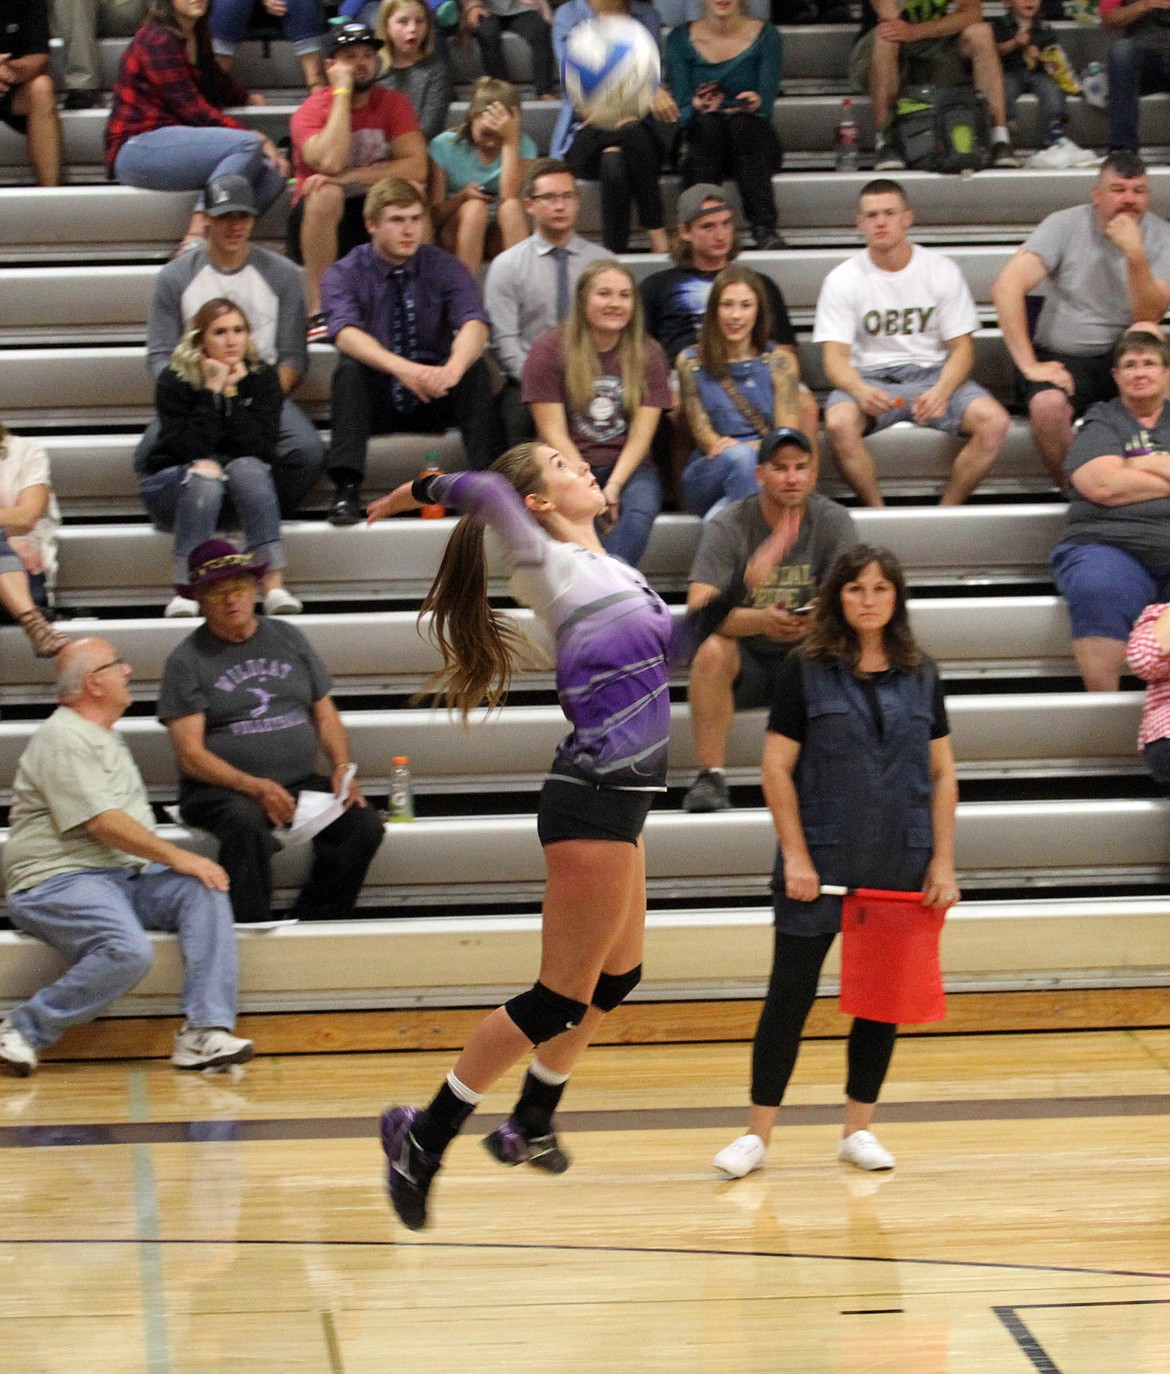 Kaili Cates drills one of her patented jump serves during Kellogg's match on Tuesday night.